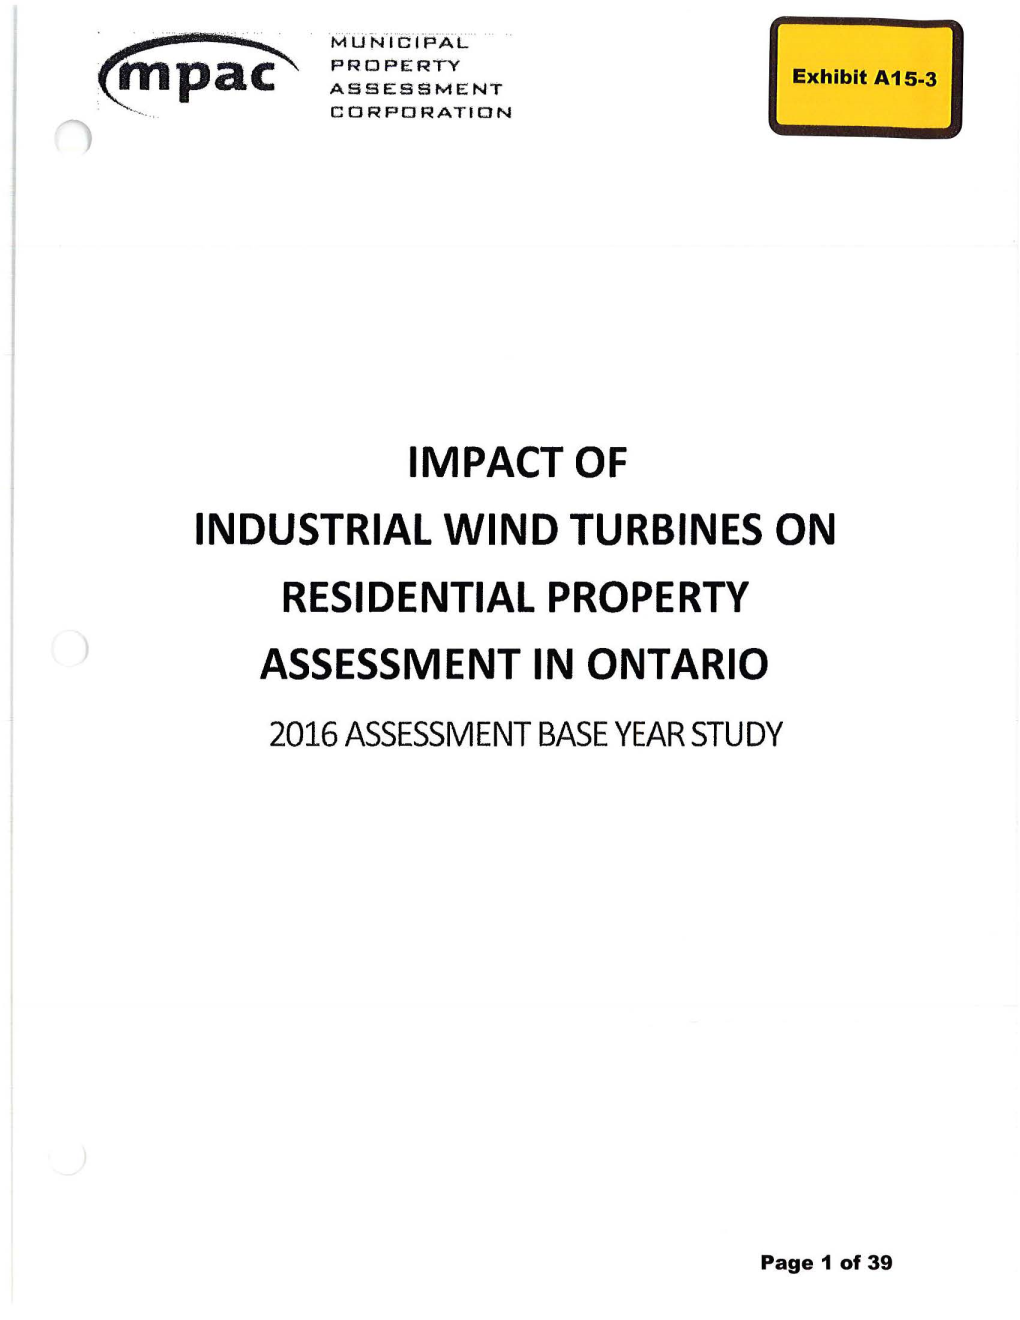 Impact of Industrial Wind Turbines on Residential Property Assessment in Ontario 2016 Assessment Base Year Study